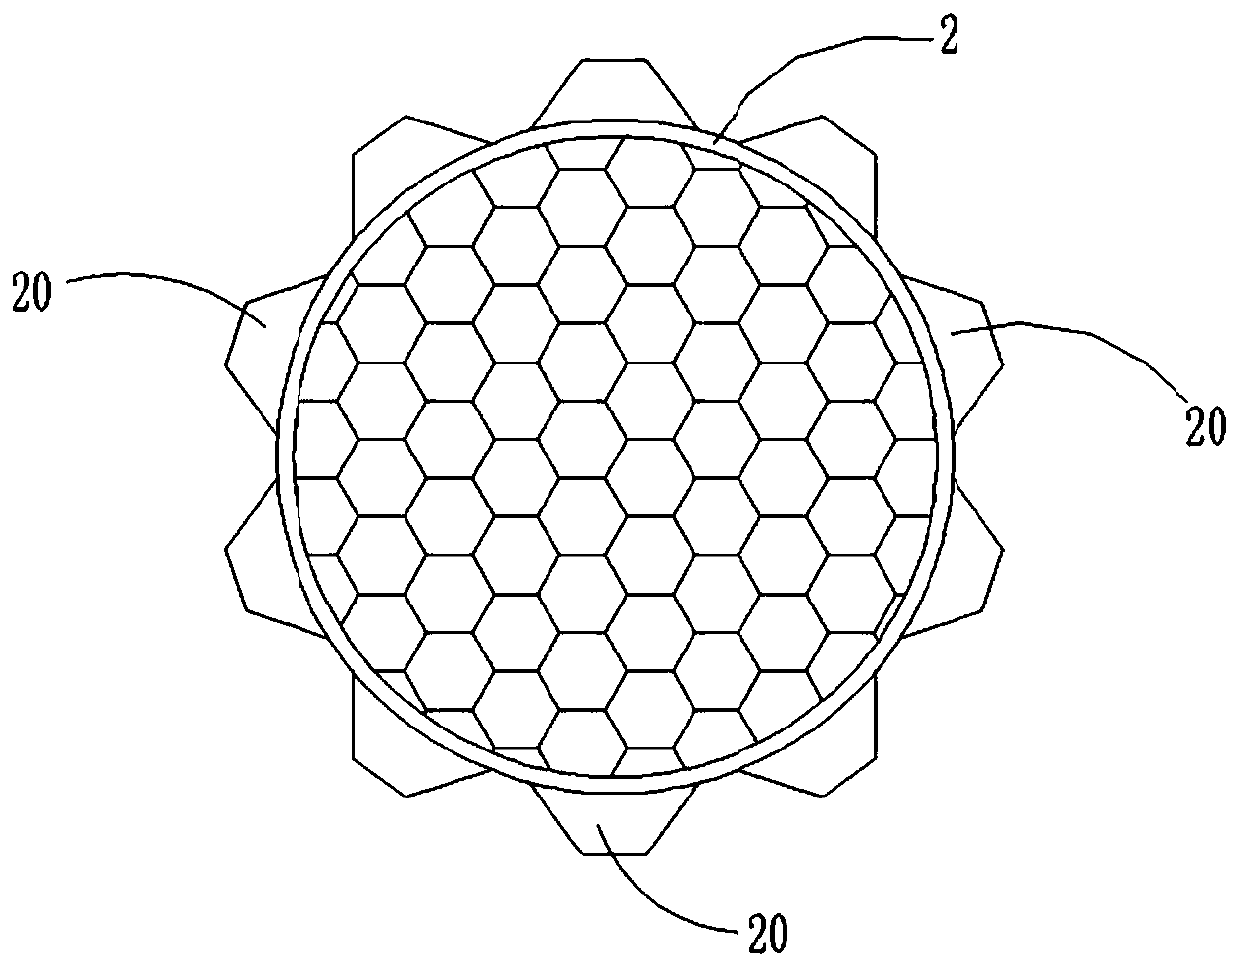 Concrete panel joint surface flexible water stopping anti-icing structure and mounting method